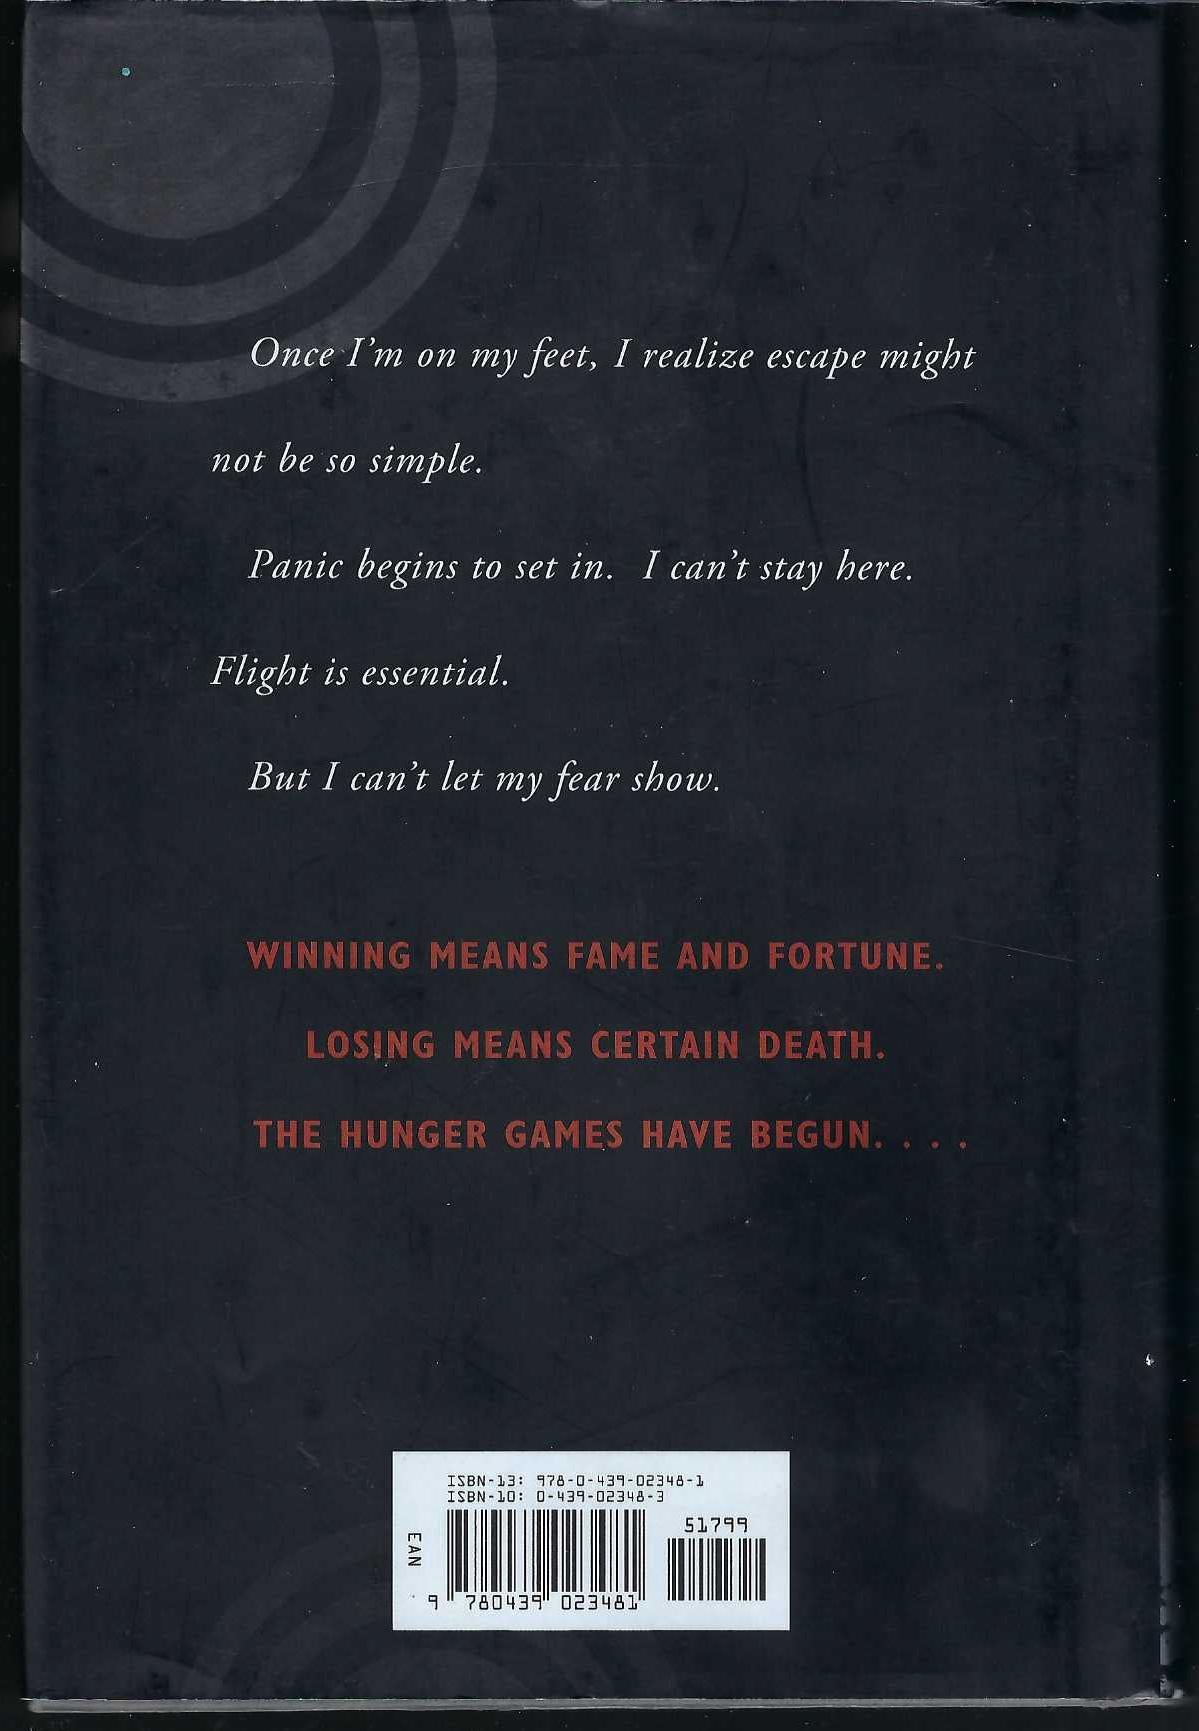 Hunger Games book 1 by Suzanne Collins